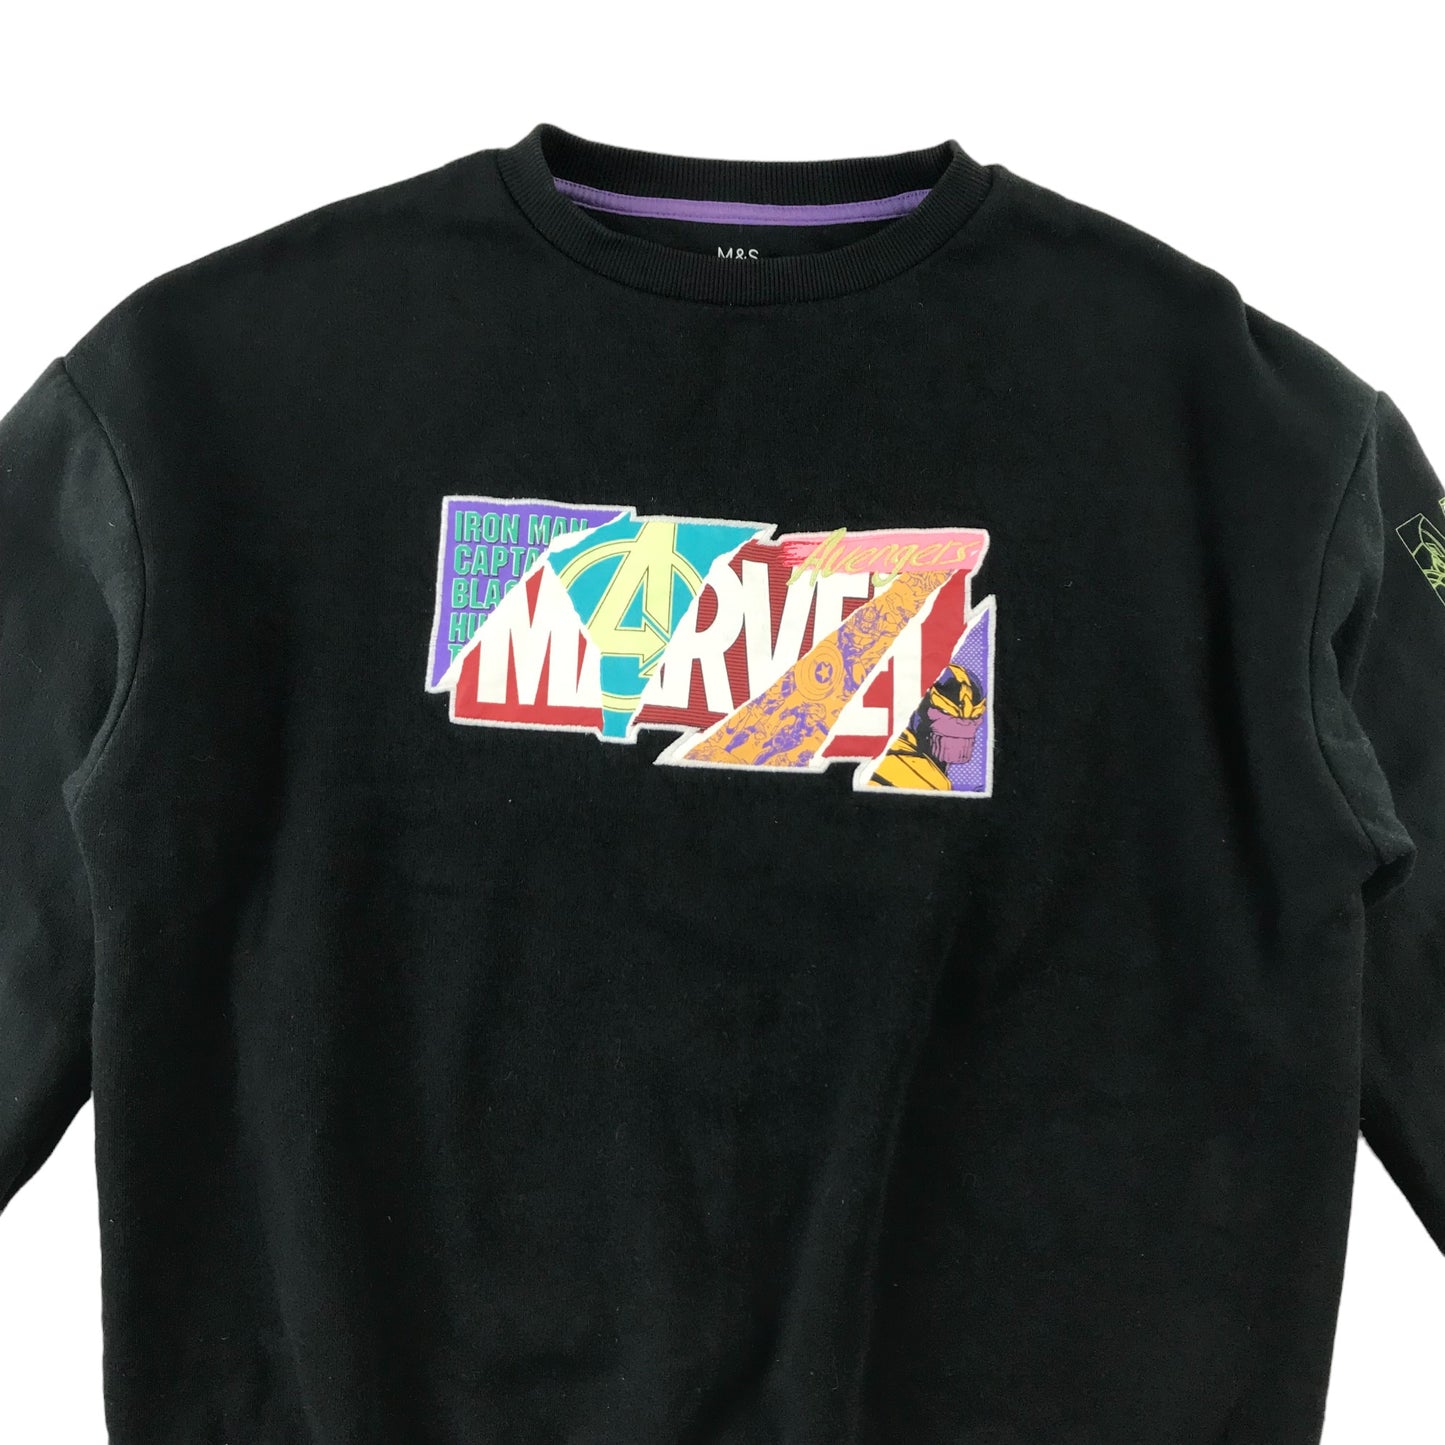 M&S sweater 12-13 years black Marvel Avengers Text Graphic Print